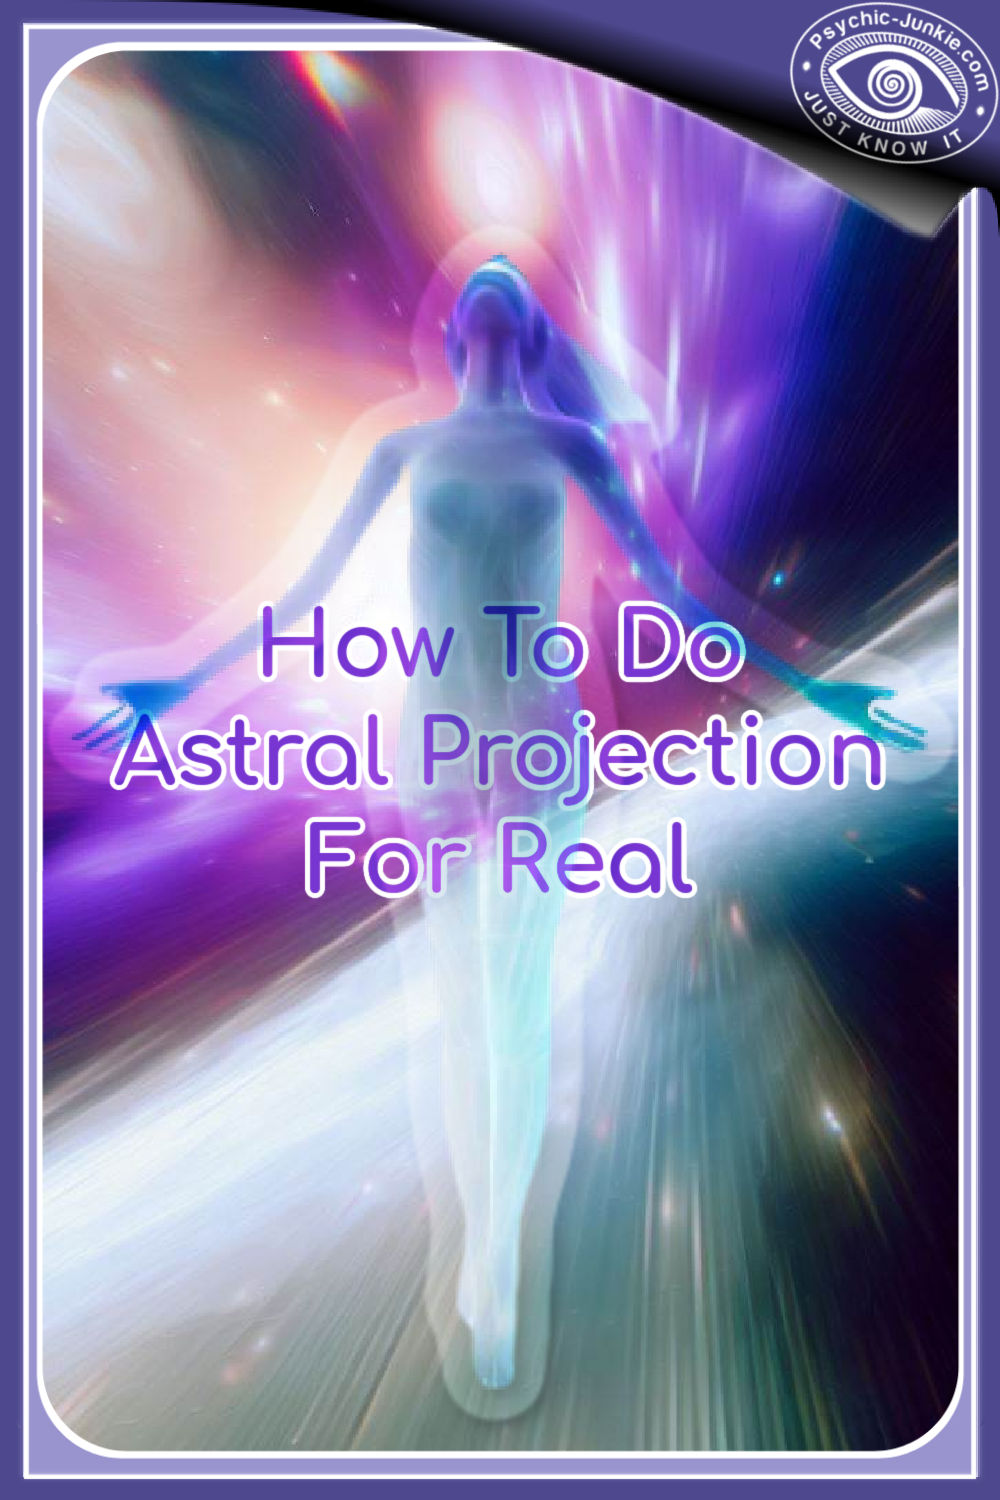 How To Do Astral Projection And Get Yourself Out Of This World